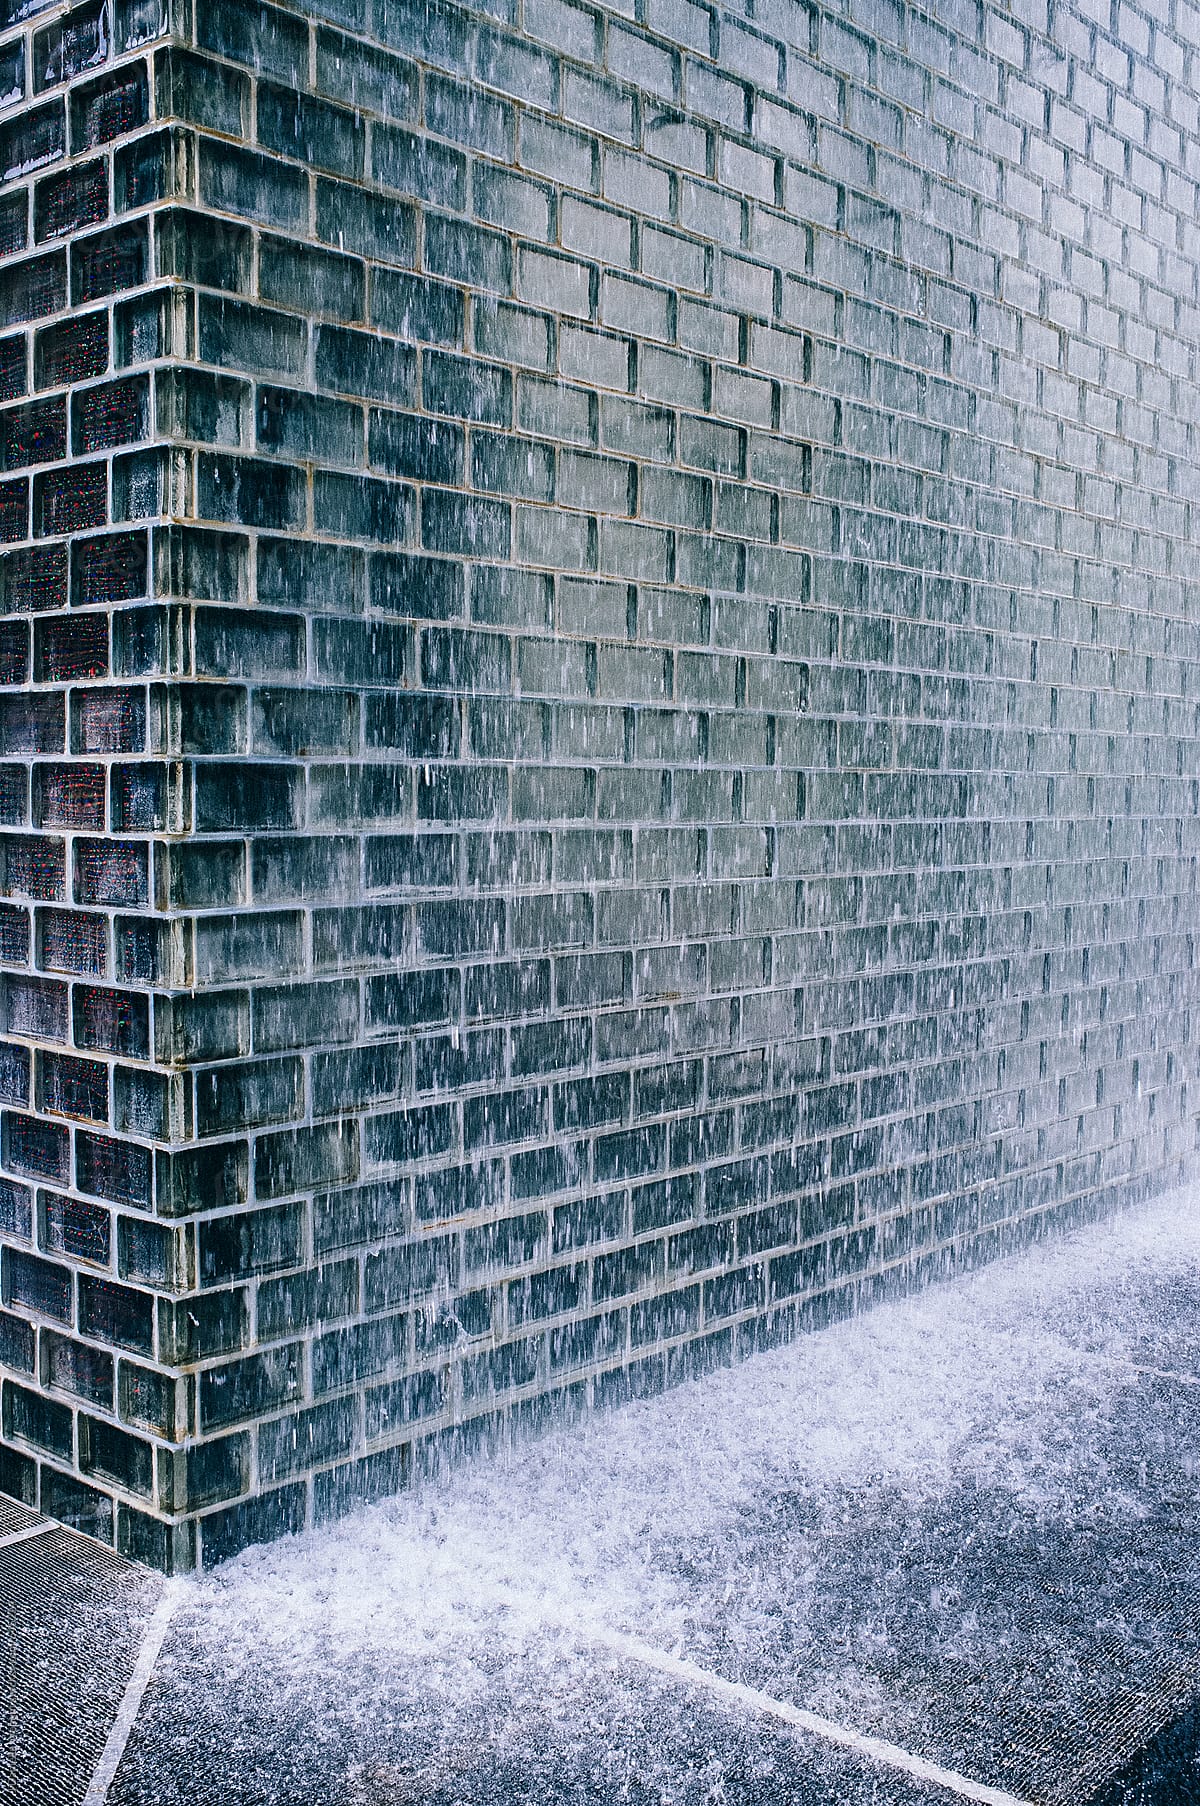 Water falling in front of black brick water fountain.